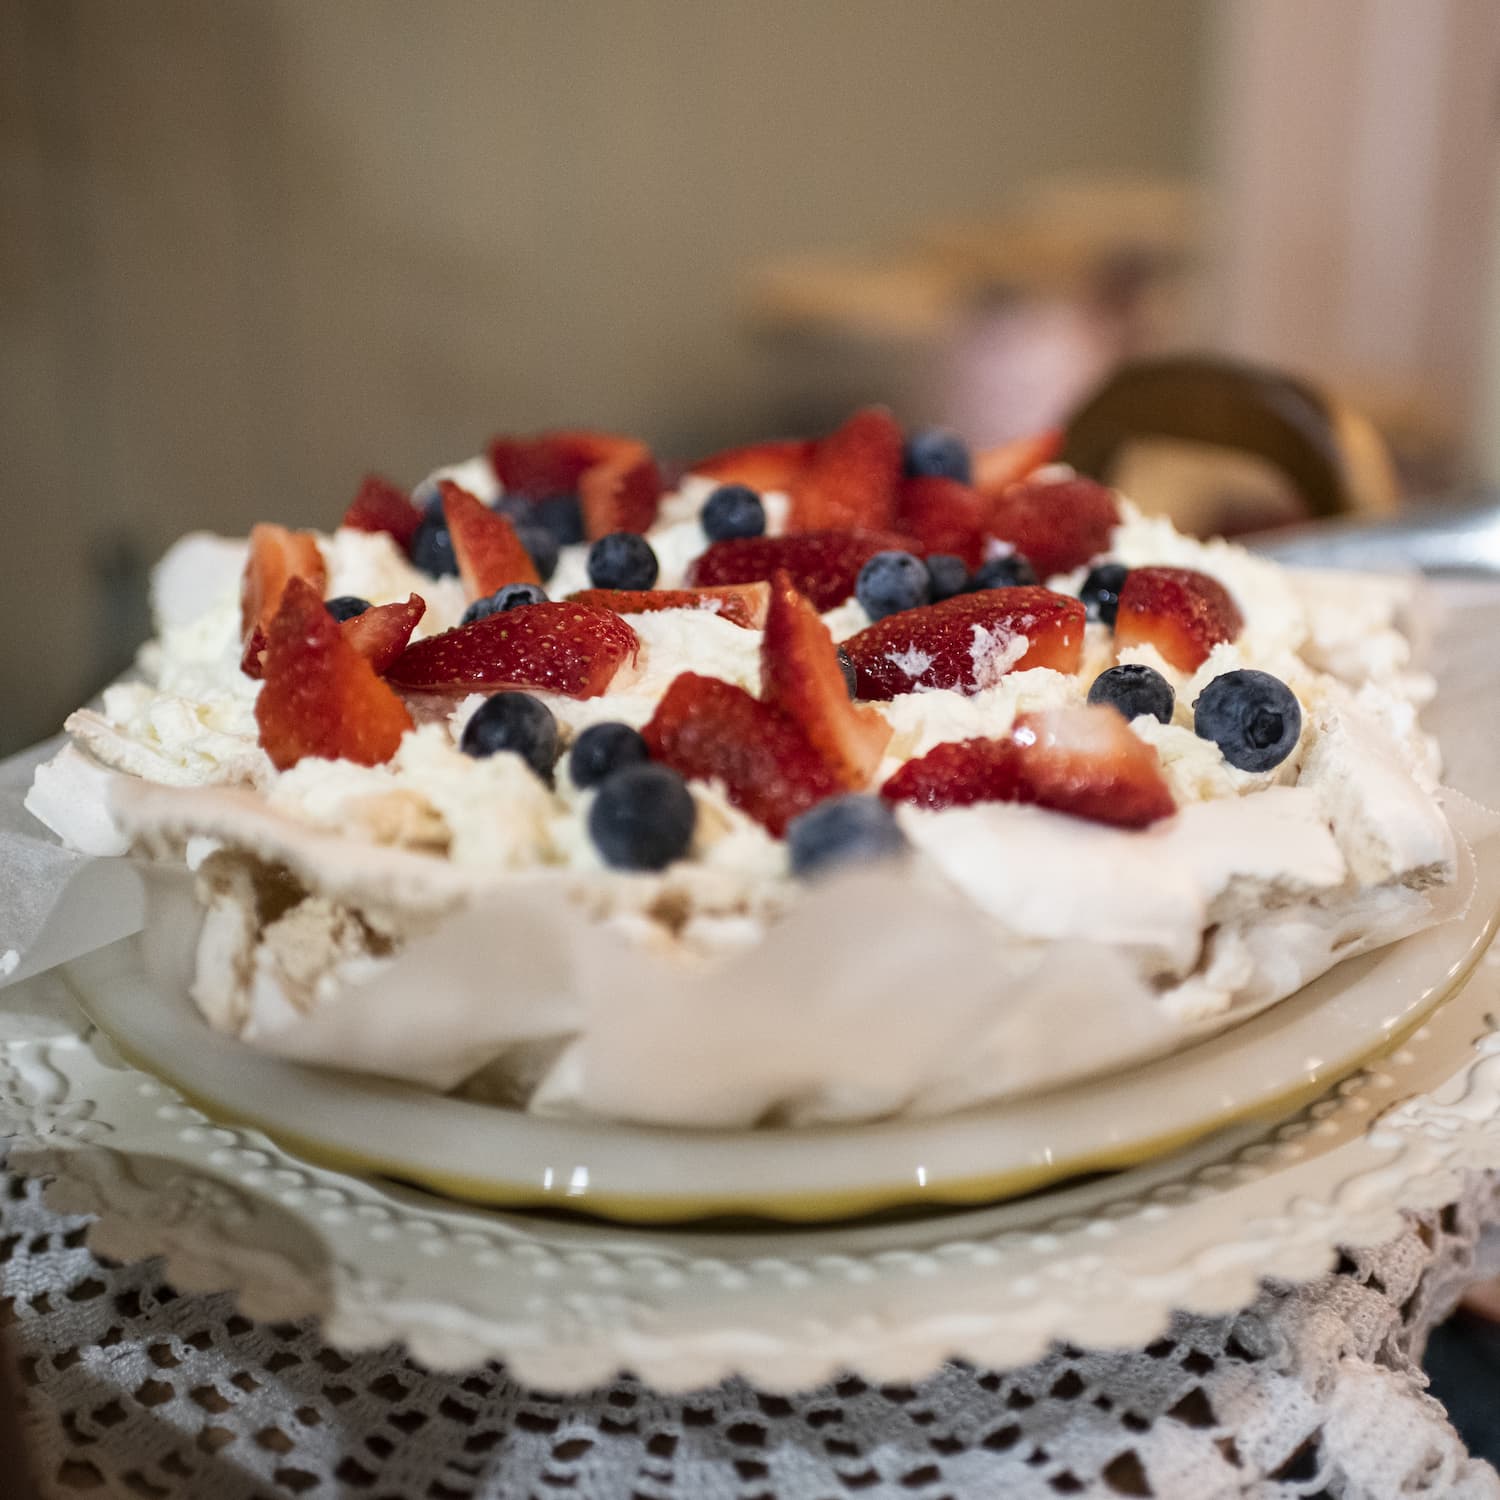 Pavlova topped with cream, strawberries and blueberries